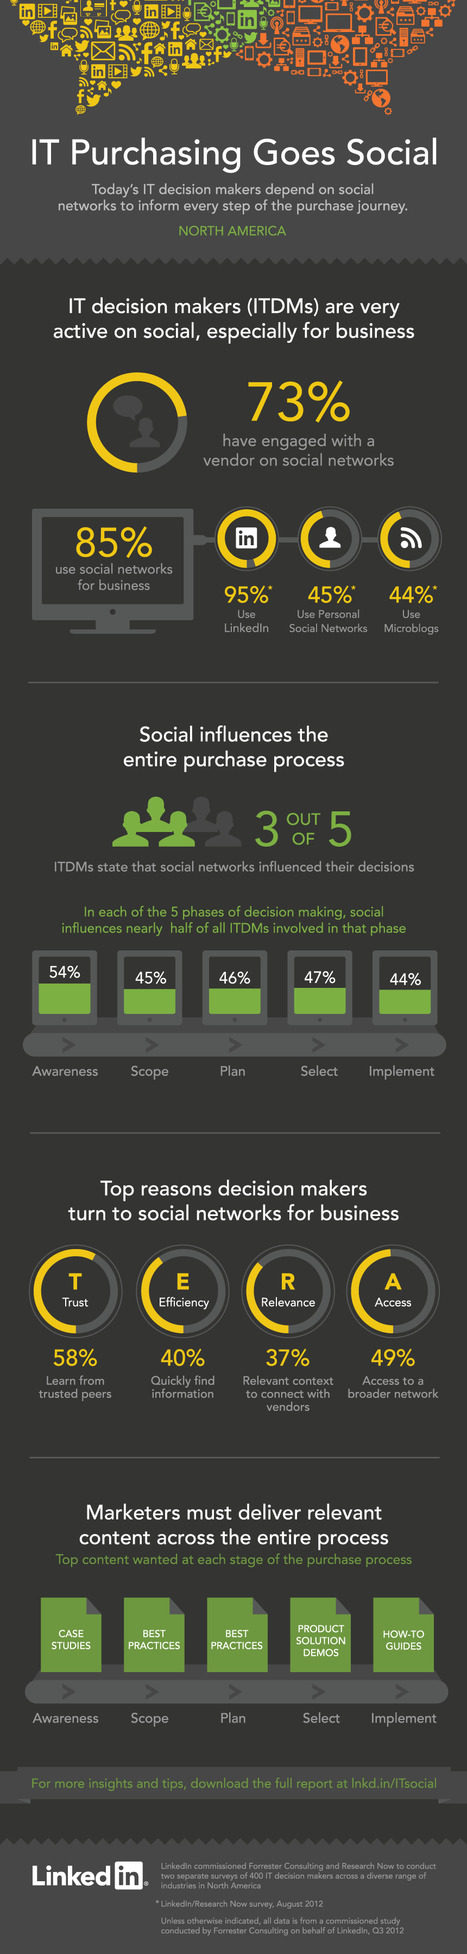 Infographic: How Social Media Impacts Purchasing Decisions... | Supply chain News and trends | Scoop.it